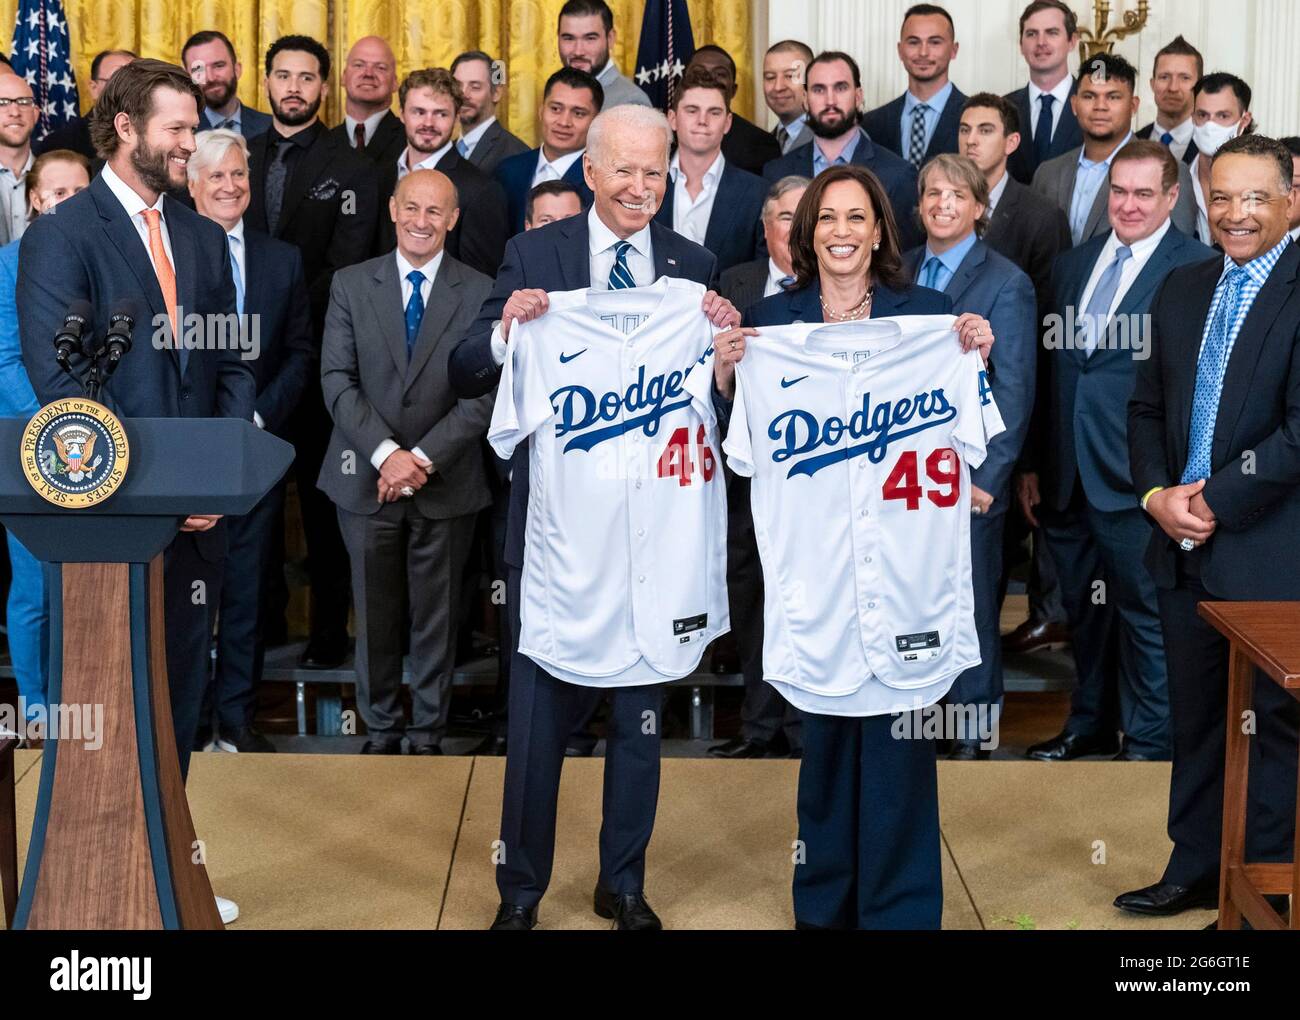 U.S President Joe Biden and Vice President Kamala Harris hold up Los Angeles Dodger baseball jerseys during a ceremony honoring the team in the East Room at the White House July 2, 2021 in Washington, D.C.The Dodgers won the 2020 World Series. Stock Photo